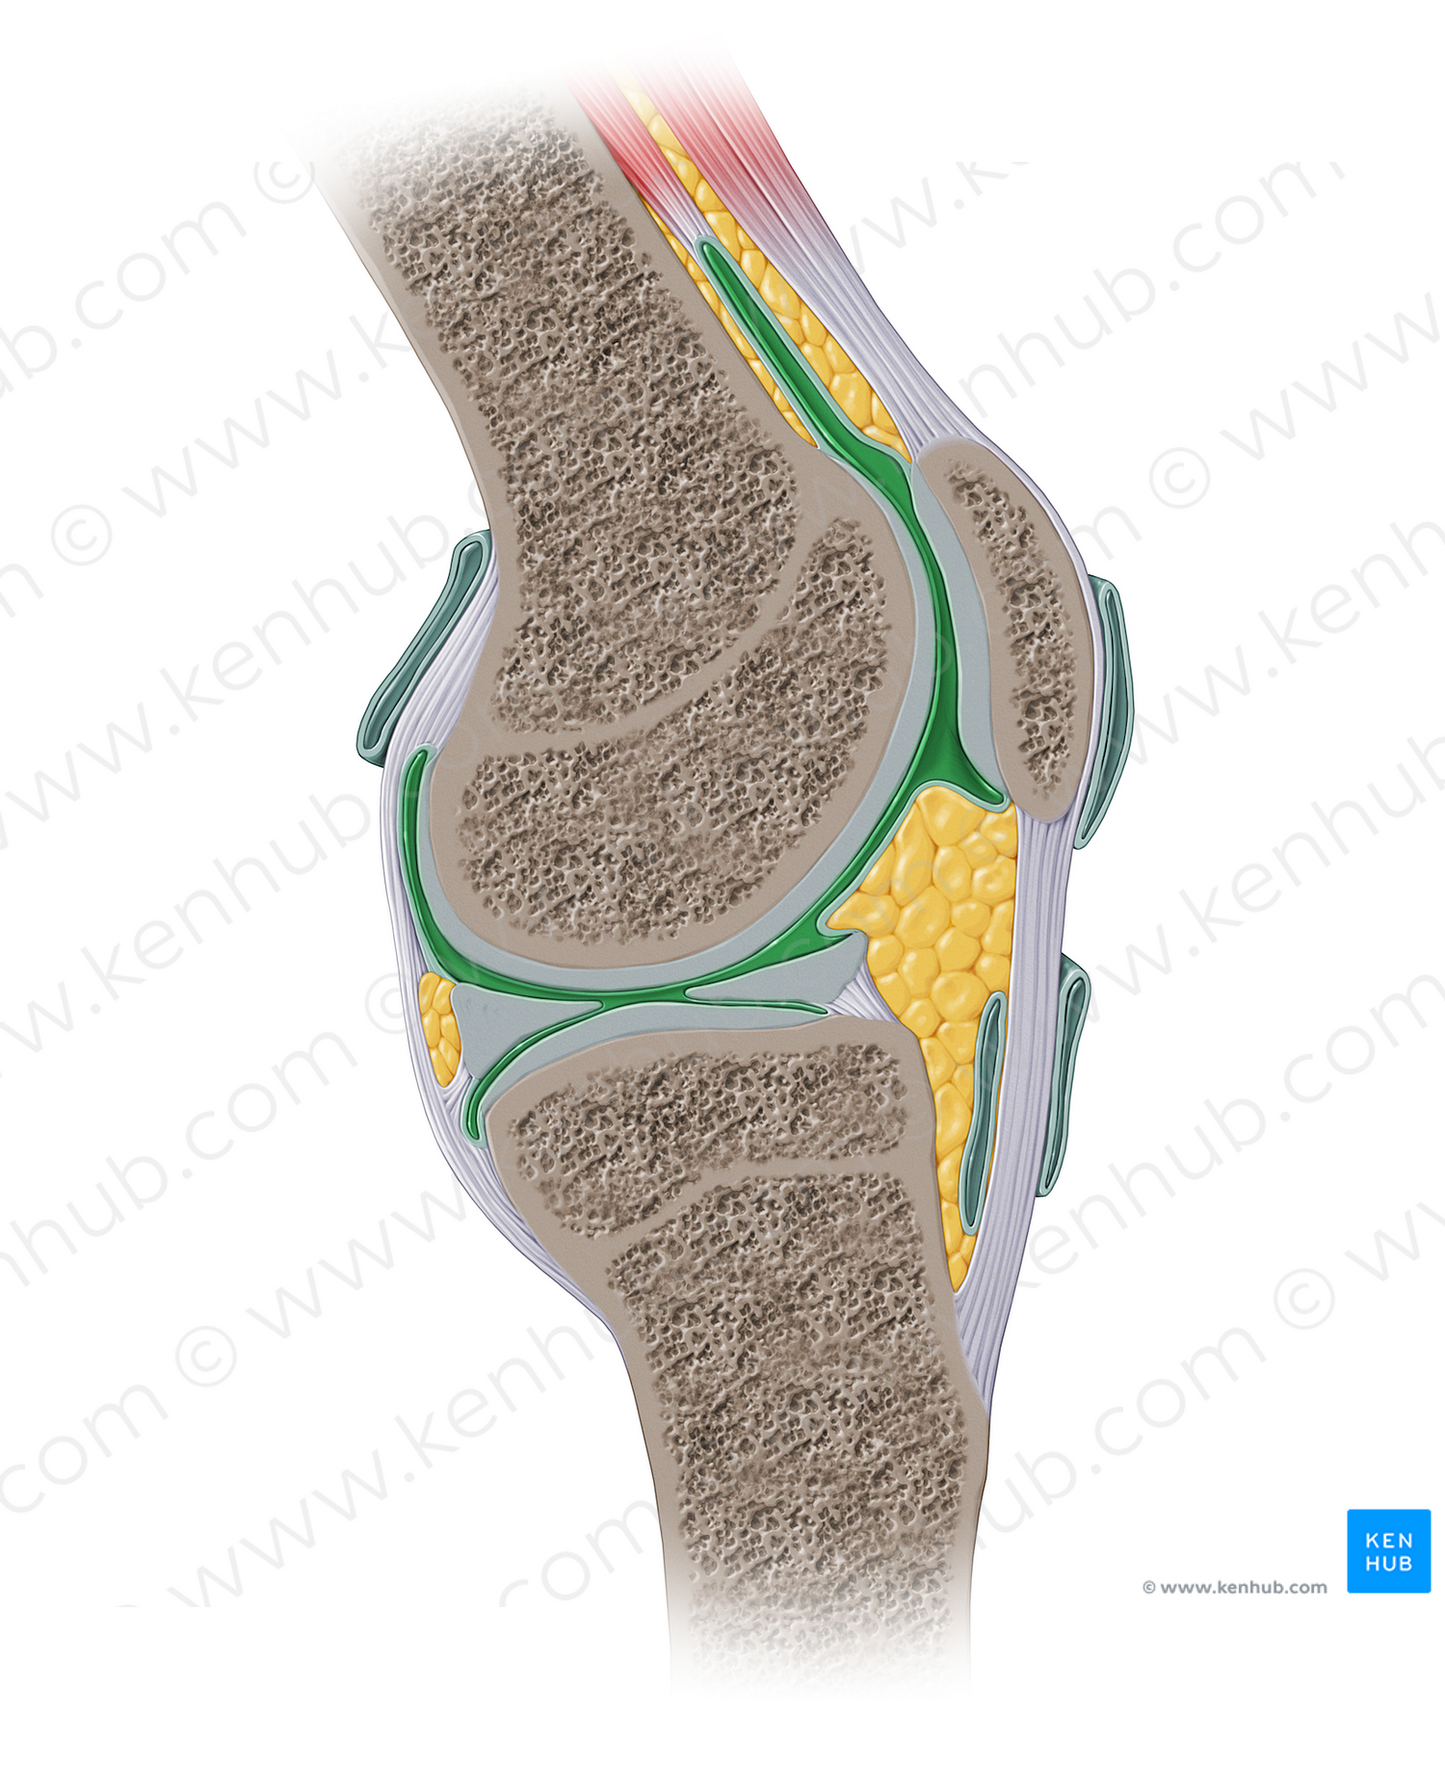 Articular cavity of knee joint (#13921)